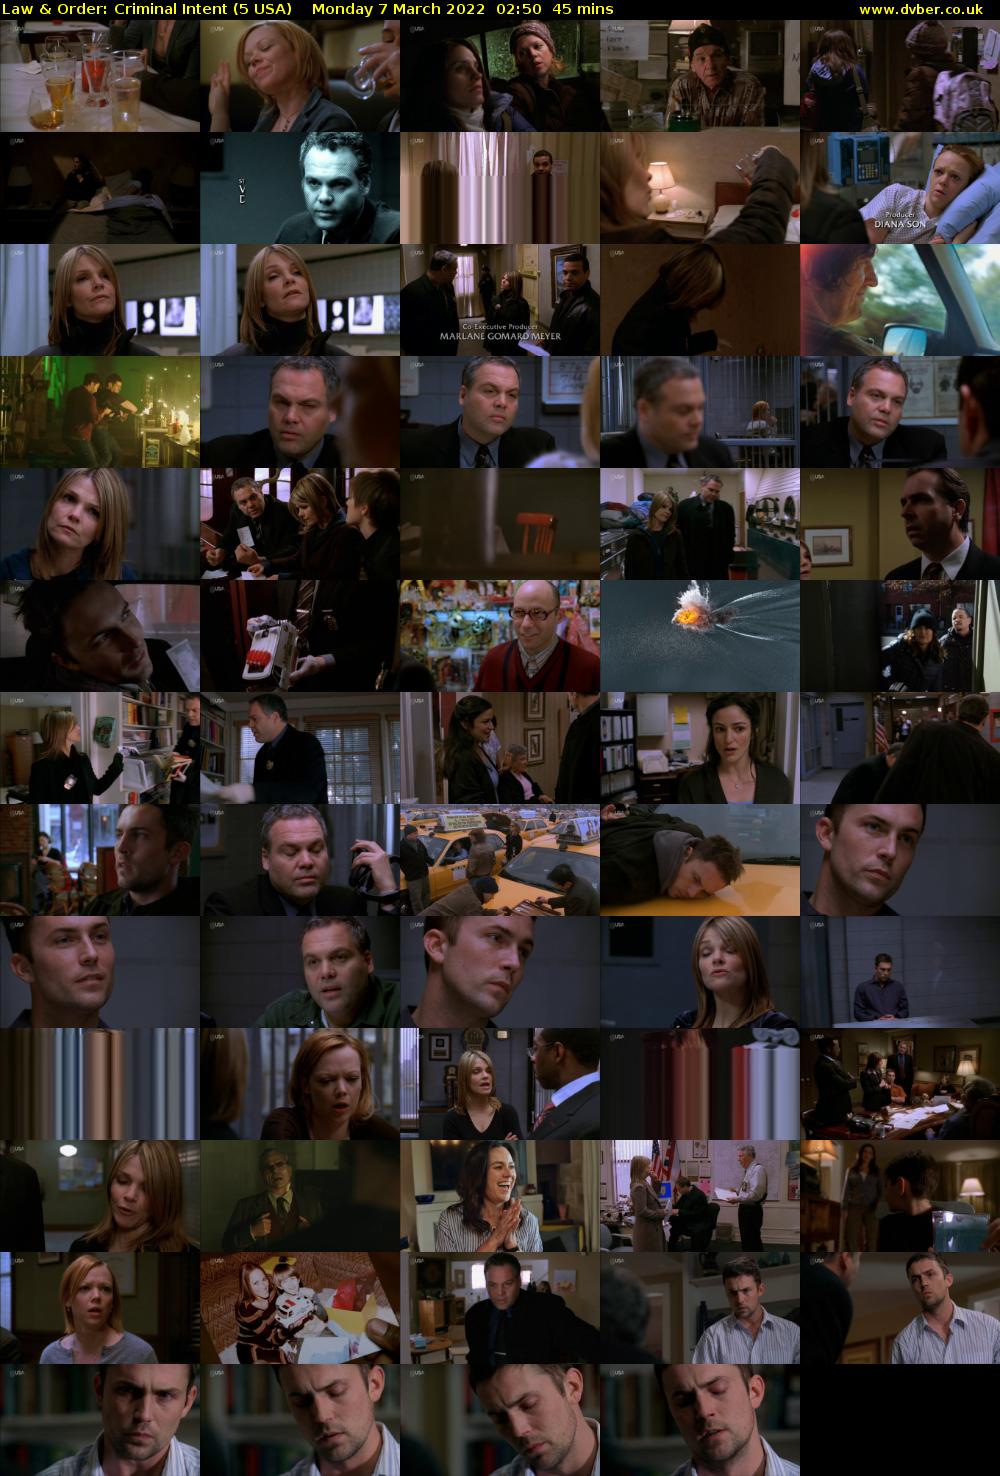 Law & Order: Criminal Intent (5 USA) Monday 7 March 2022 02:50 - 03:35